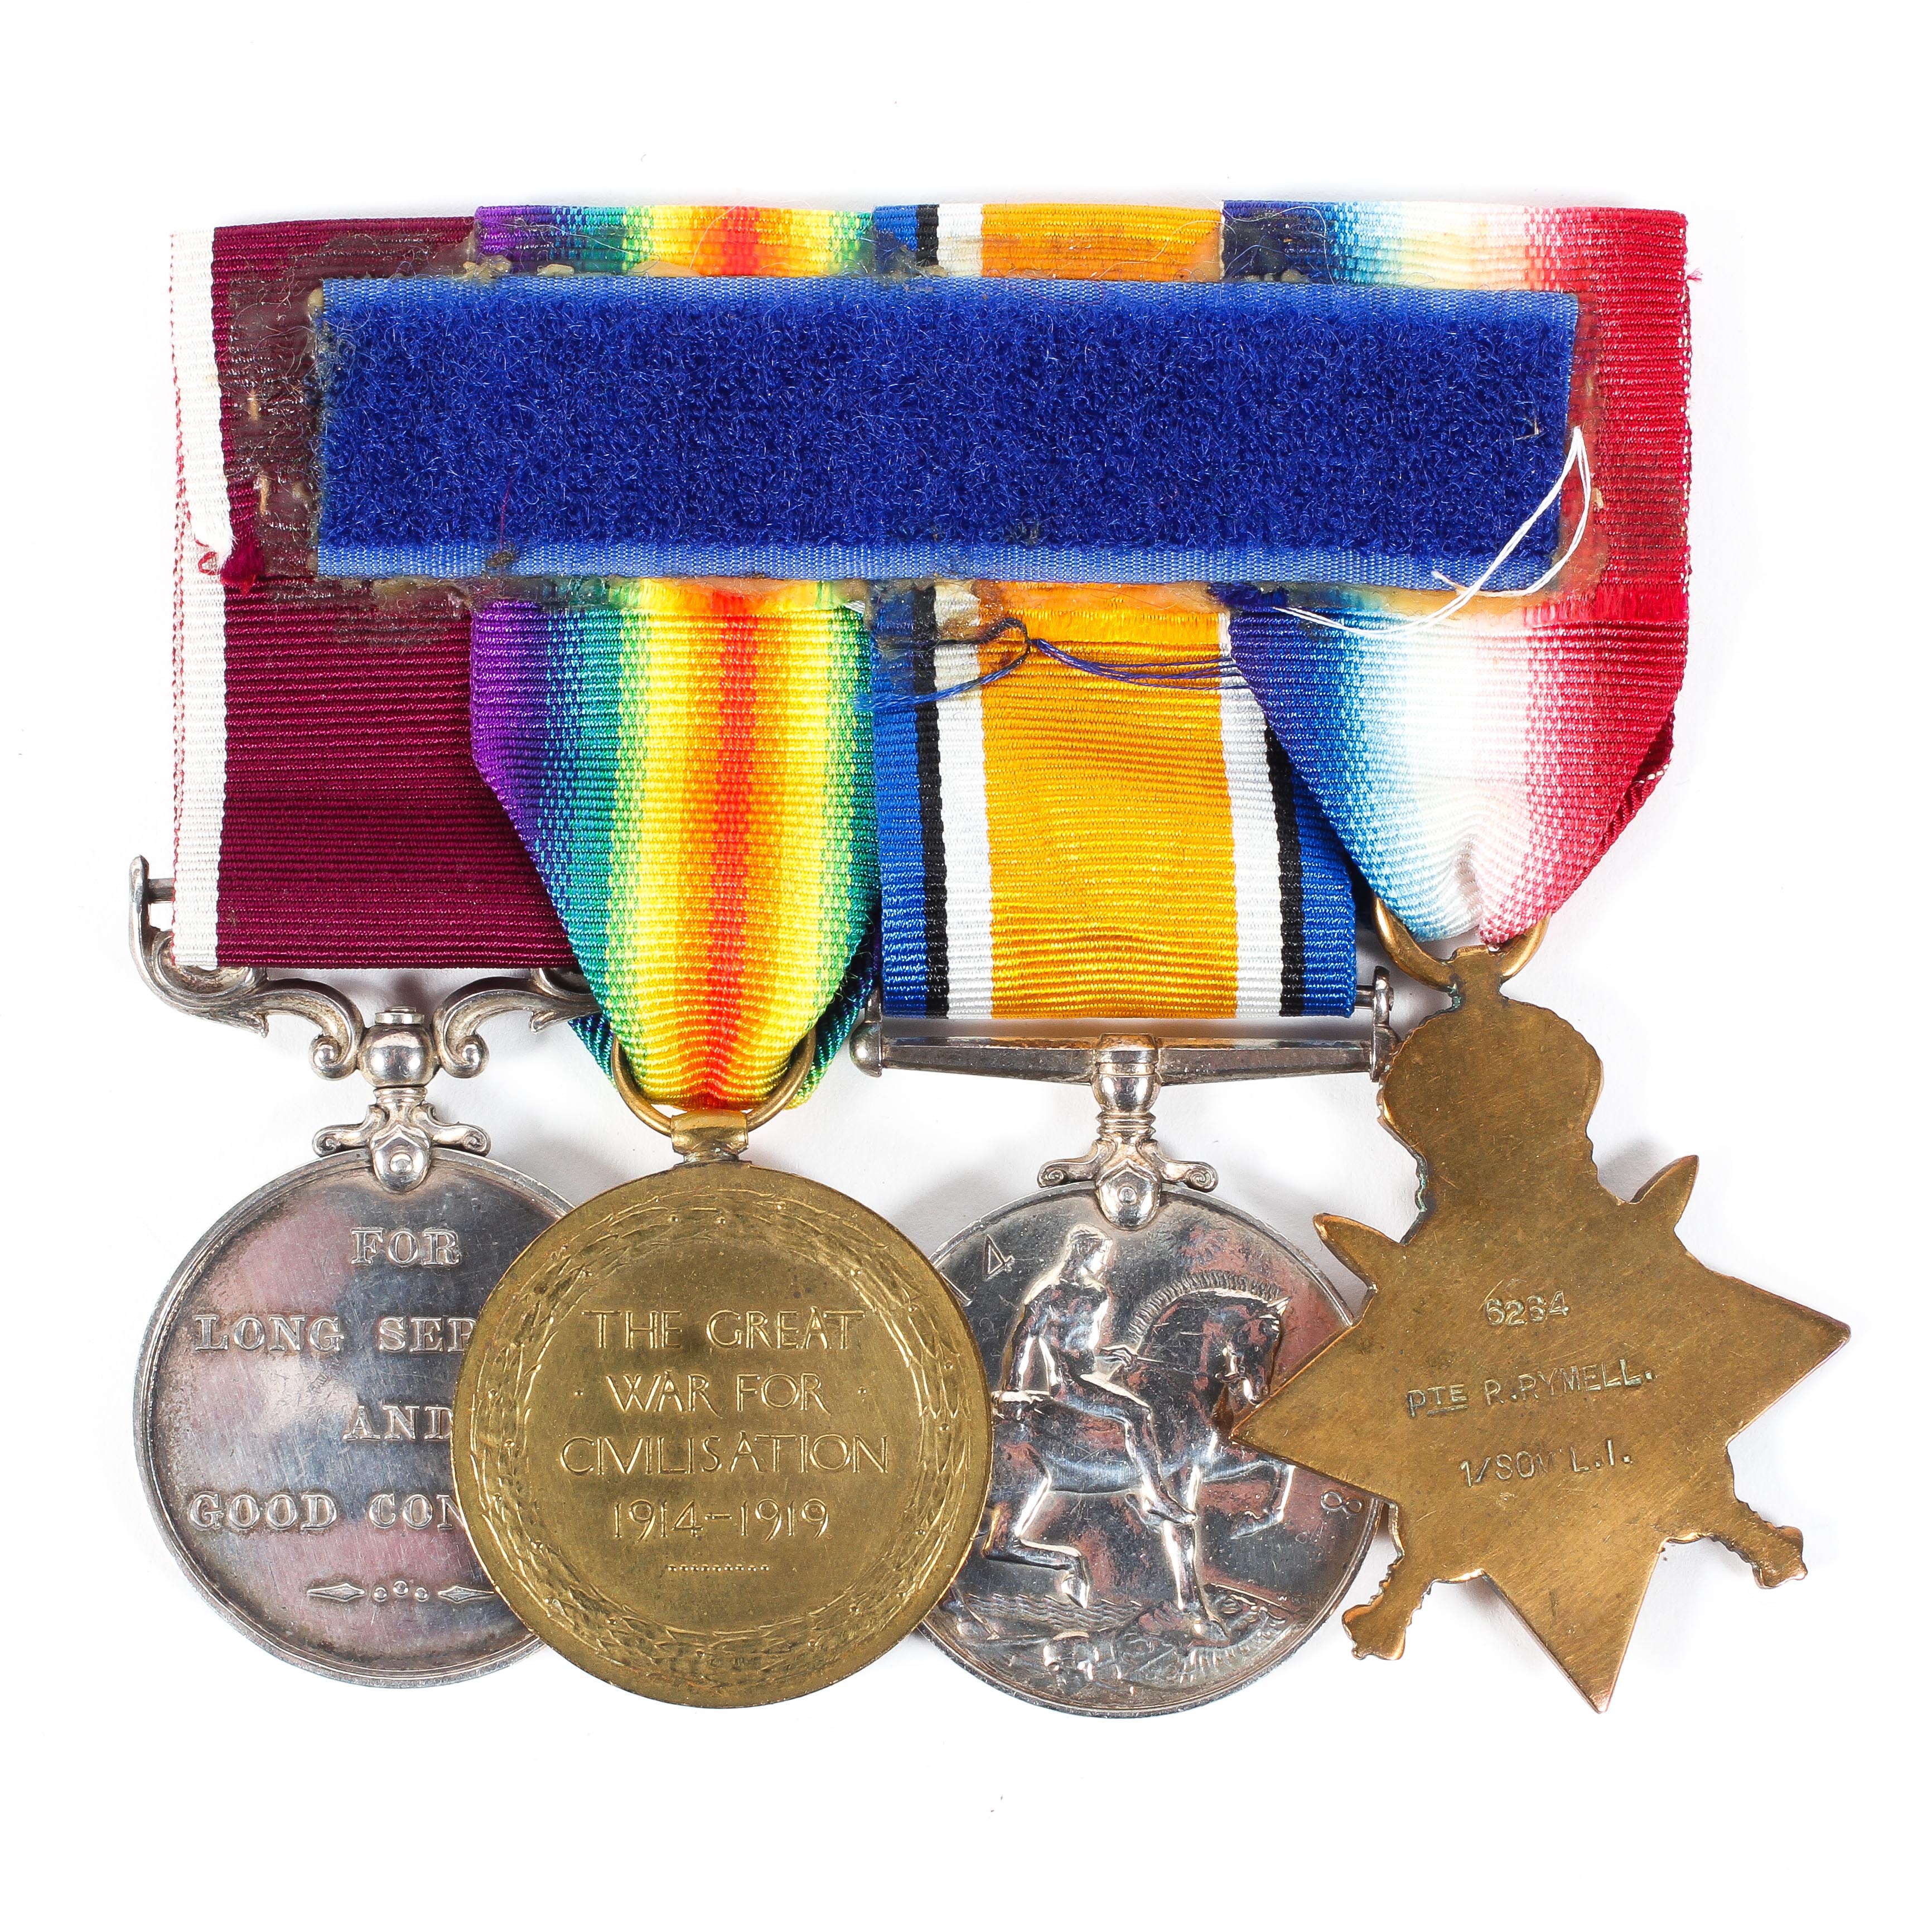 A group of Four WW1 medals presented to Pte 6264 R RYMELL Somerset Light Infantry, - Image 2 of 3